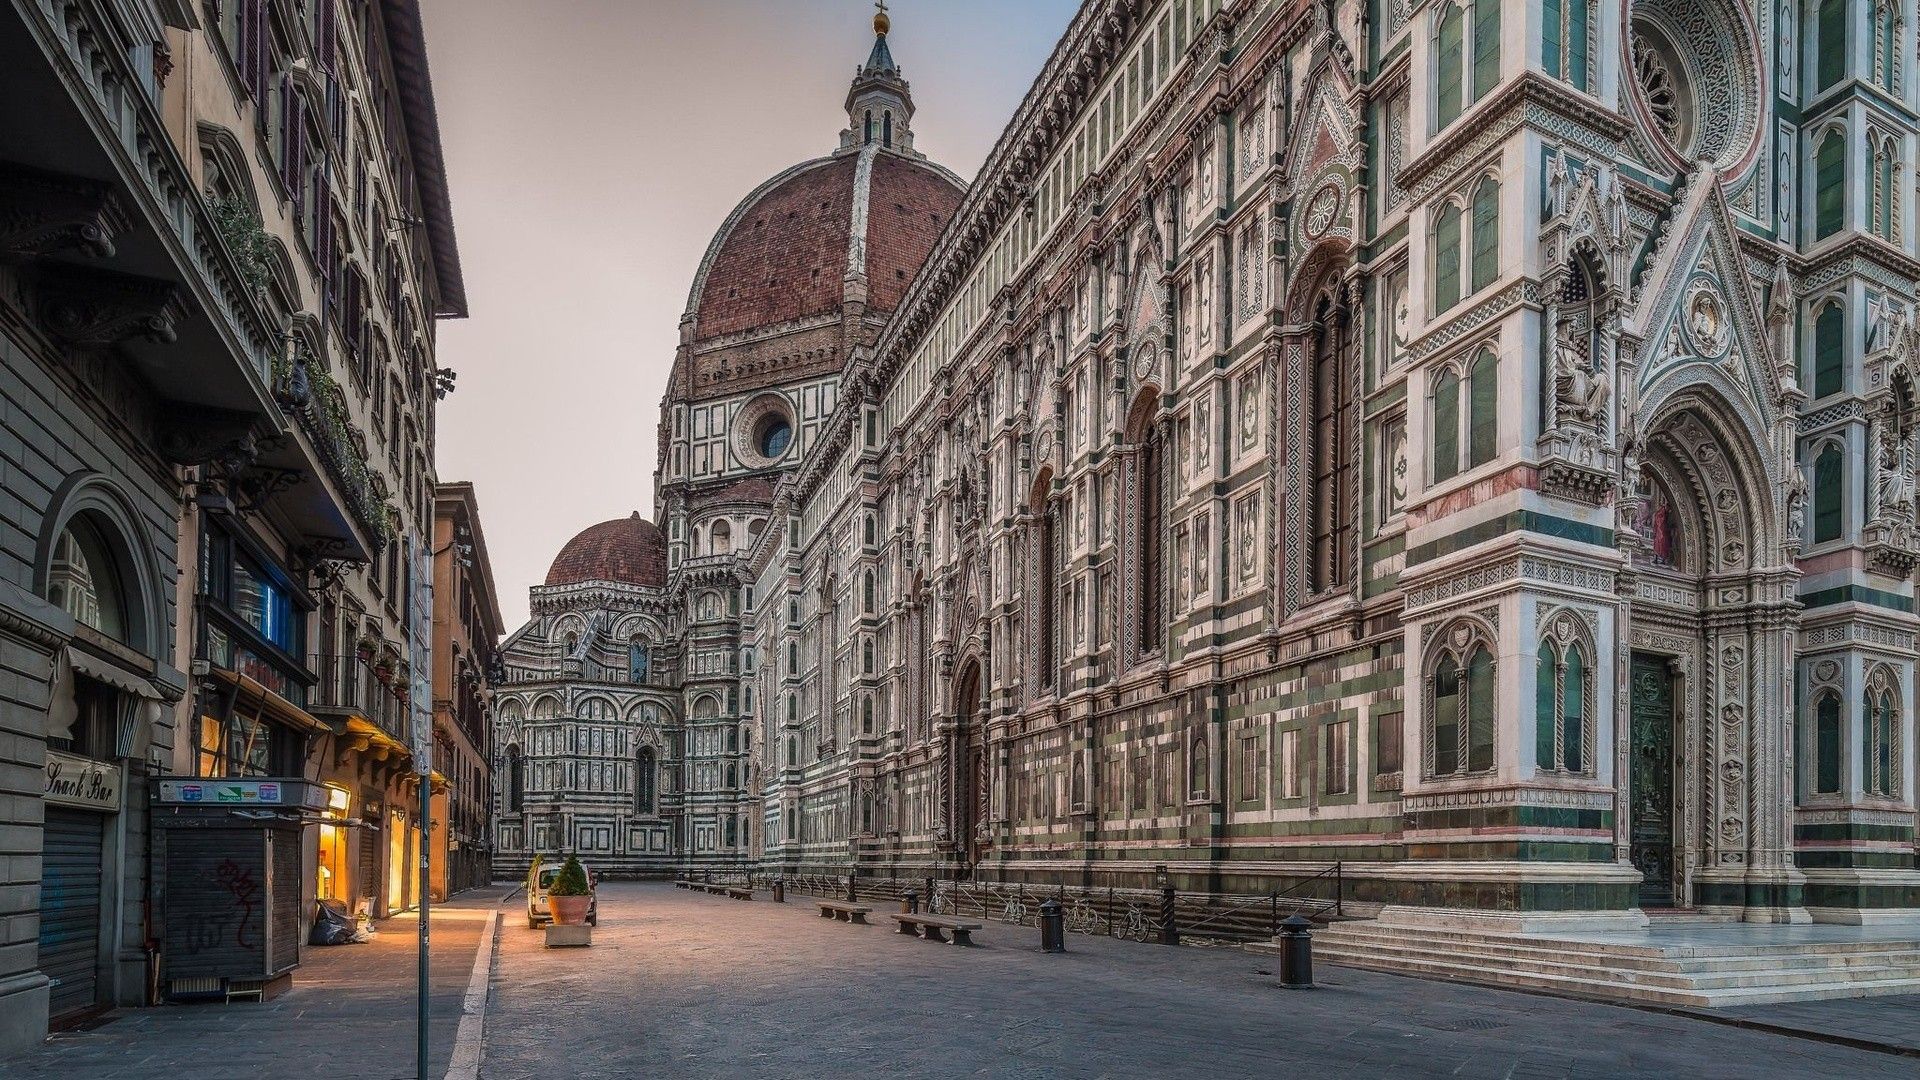 #Europe, #dome, #Italy, #old building, #cathedral, #evening, #town, #urban, #building, #Brunelleschi, #Florence, #bench, #street, #arch, #lights, #Gothic architecture, #architecture, #car, wallpaper